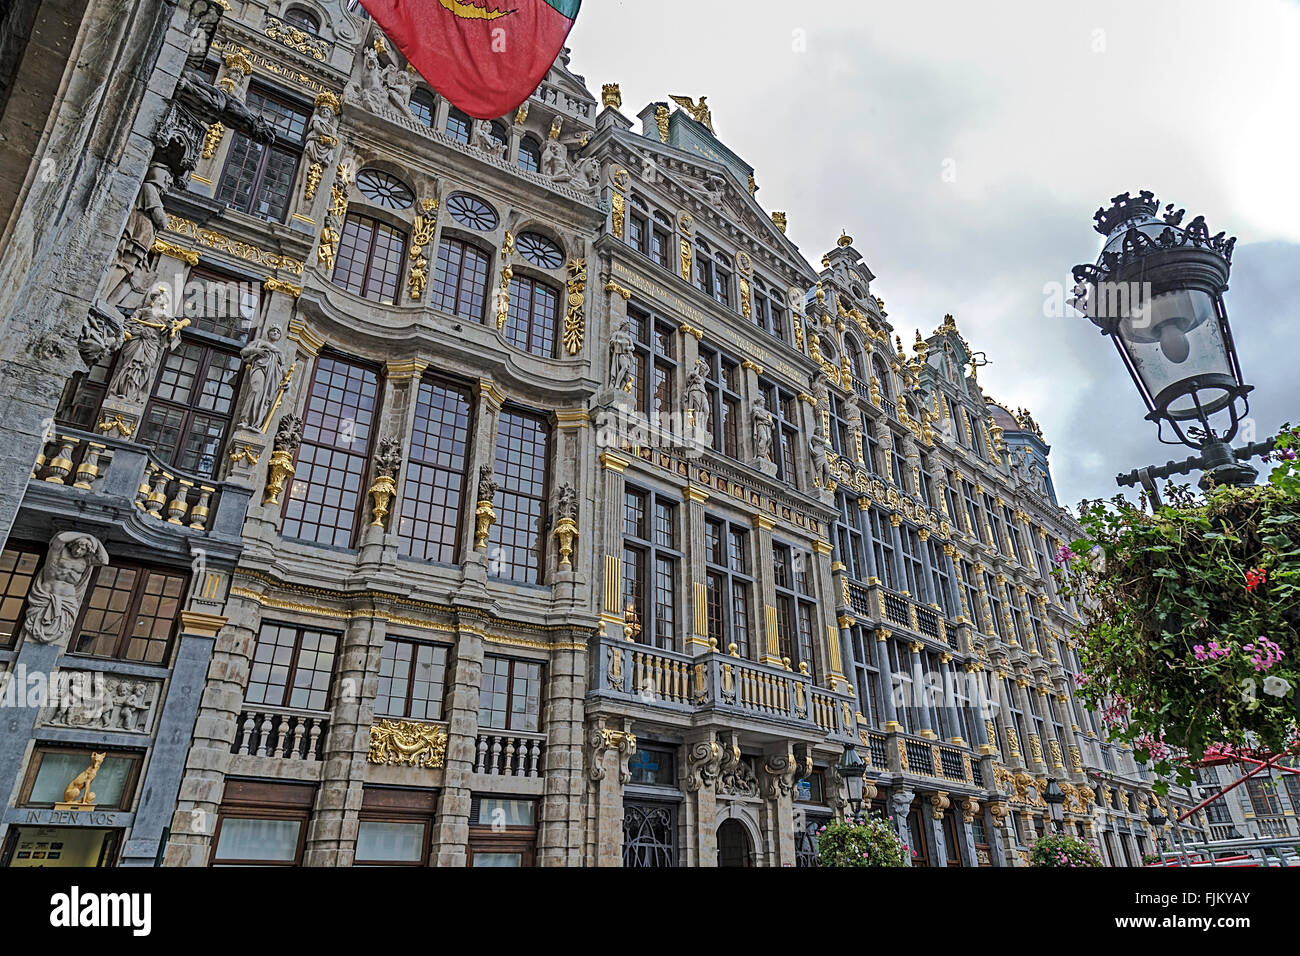 BRUSSELS, BELGIUM - OCTOBER 15, 2015: Buildings from historic center of Brussels, Belgium. part of the UNESCO World Heritage sit Stock Photo